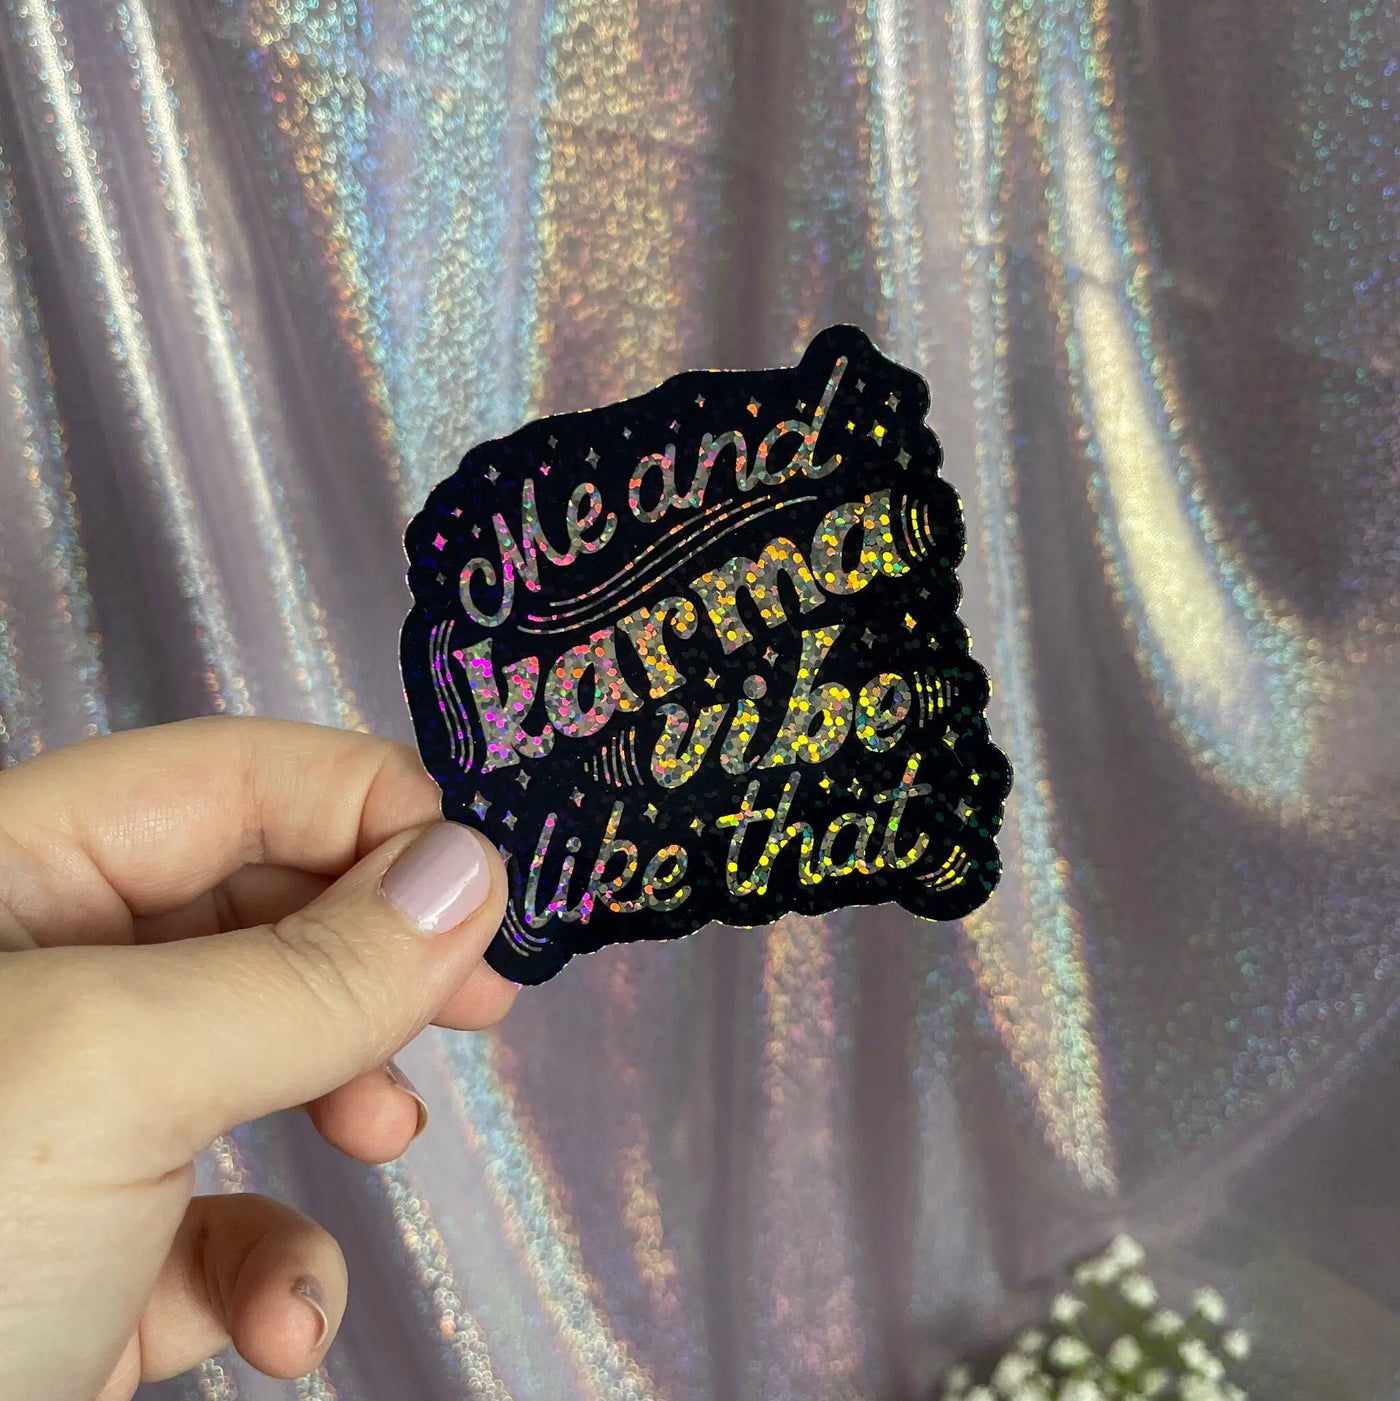 Me and Karma Vibe Like That holographic glitter sticker MangoIllustrated